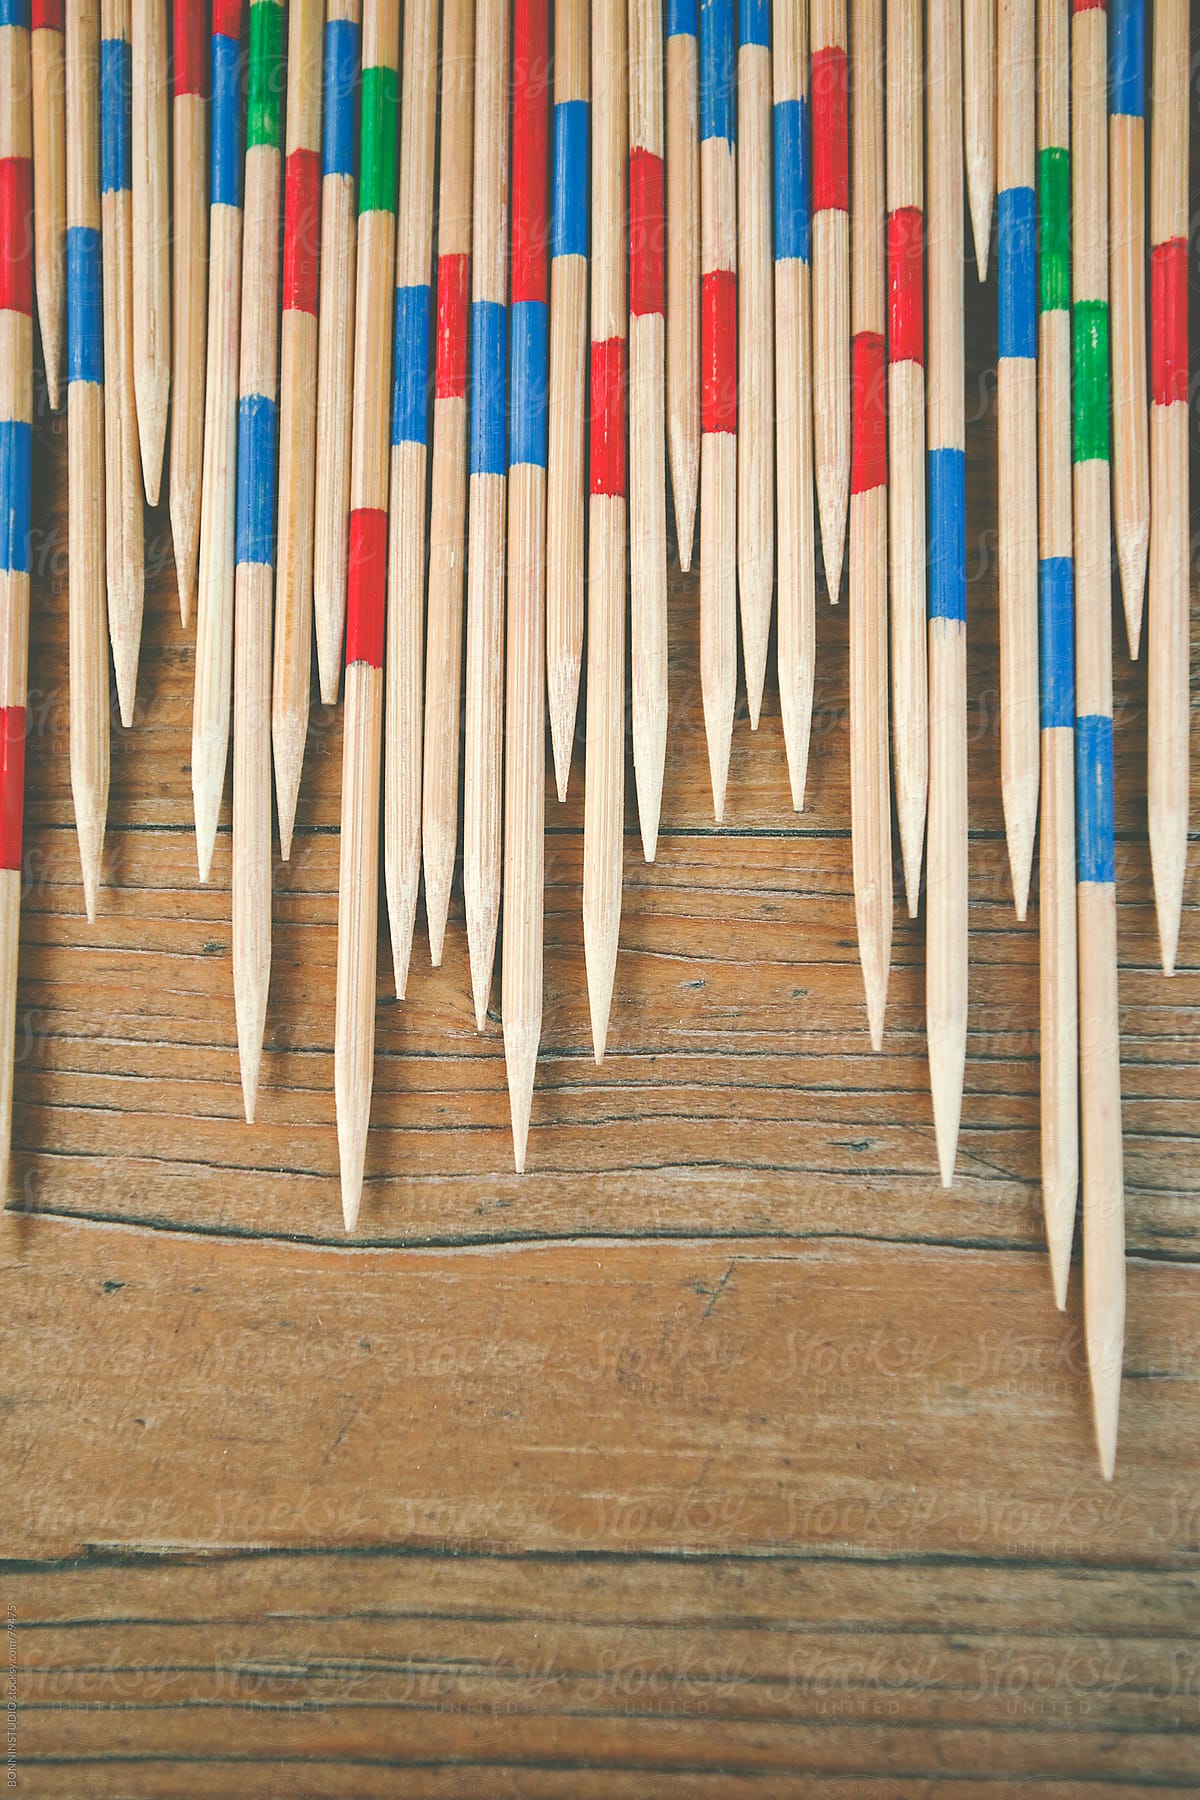 Mikado stock image. Image of strategy, color, match, play - 31955749